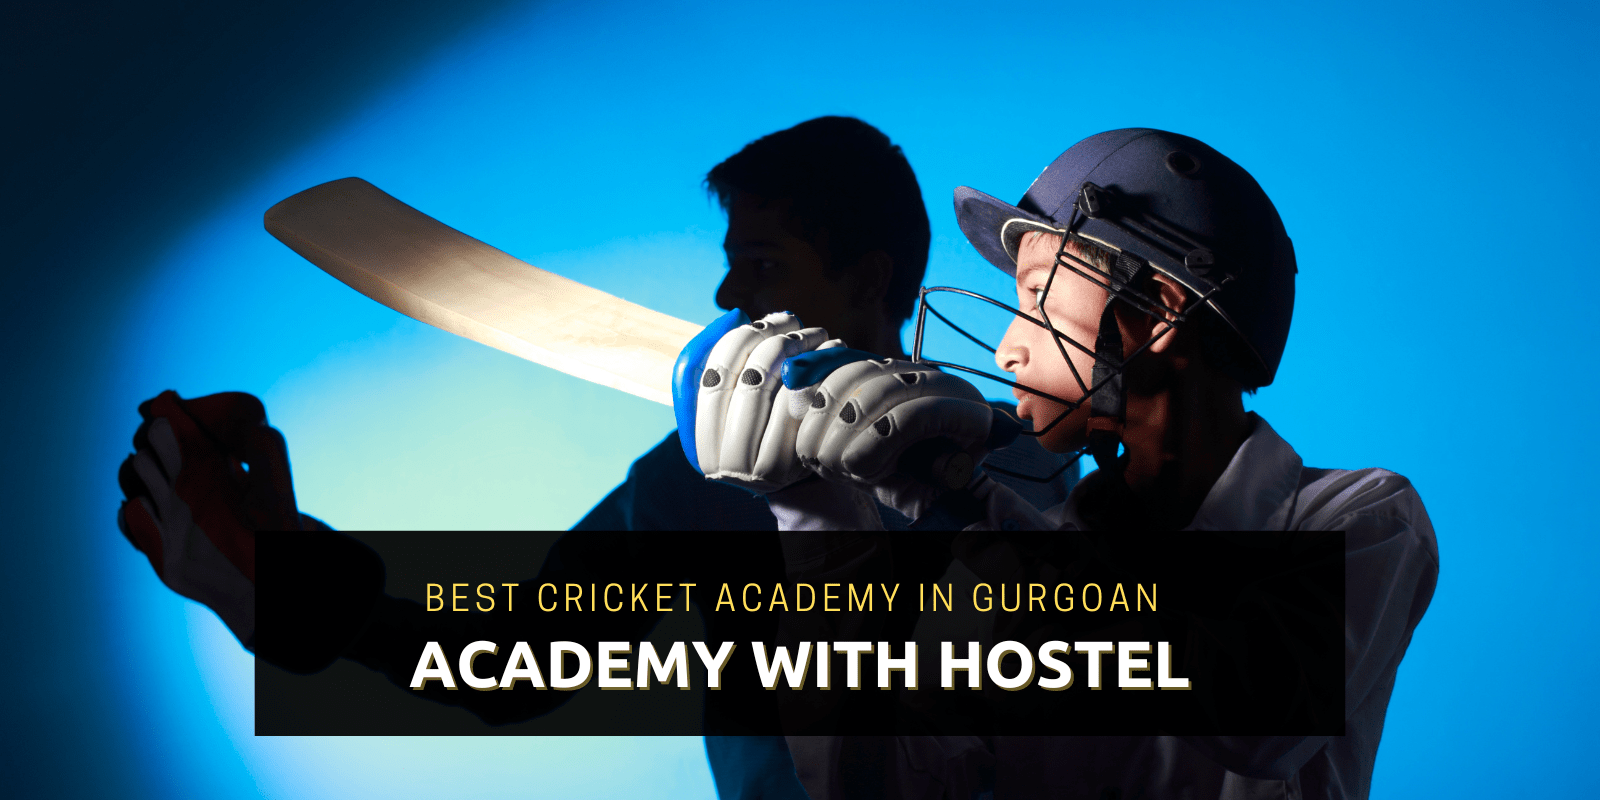 Cricket Academy with Hostel